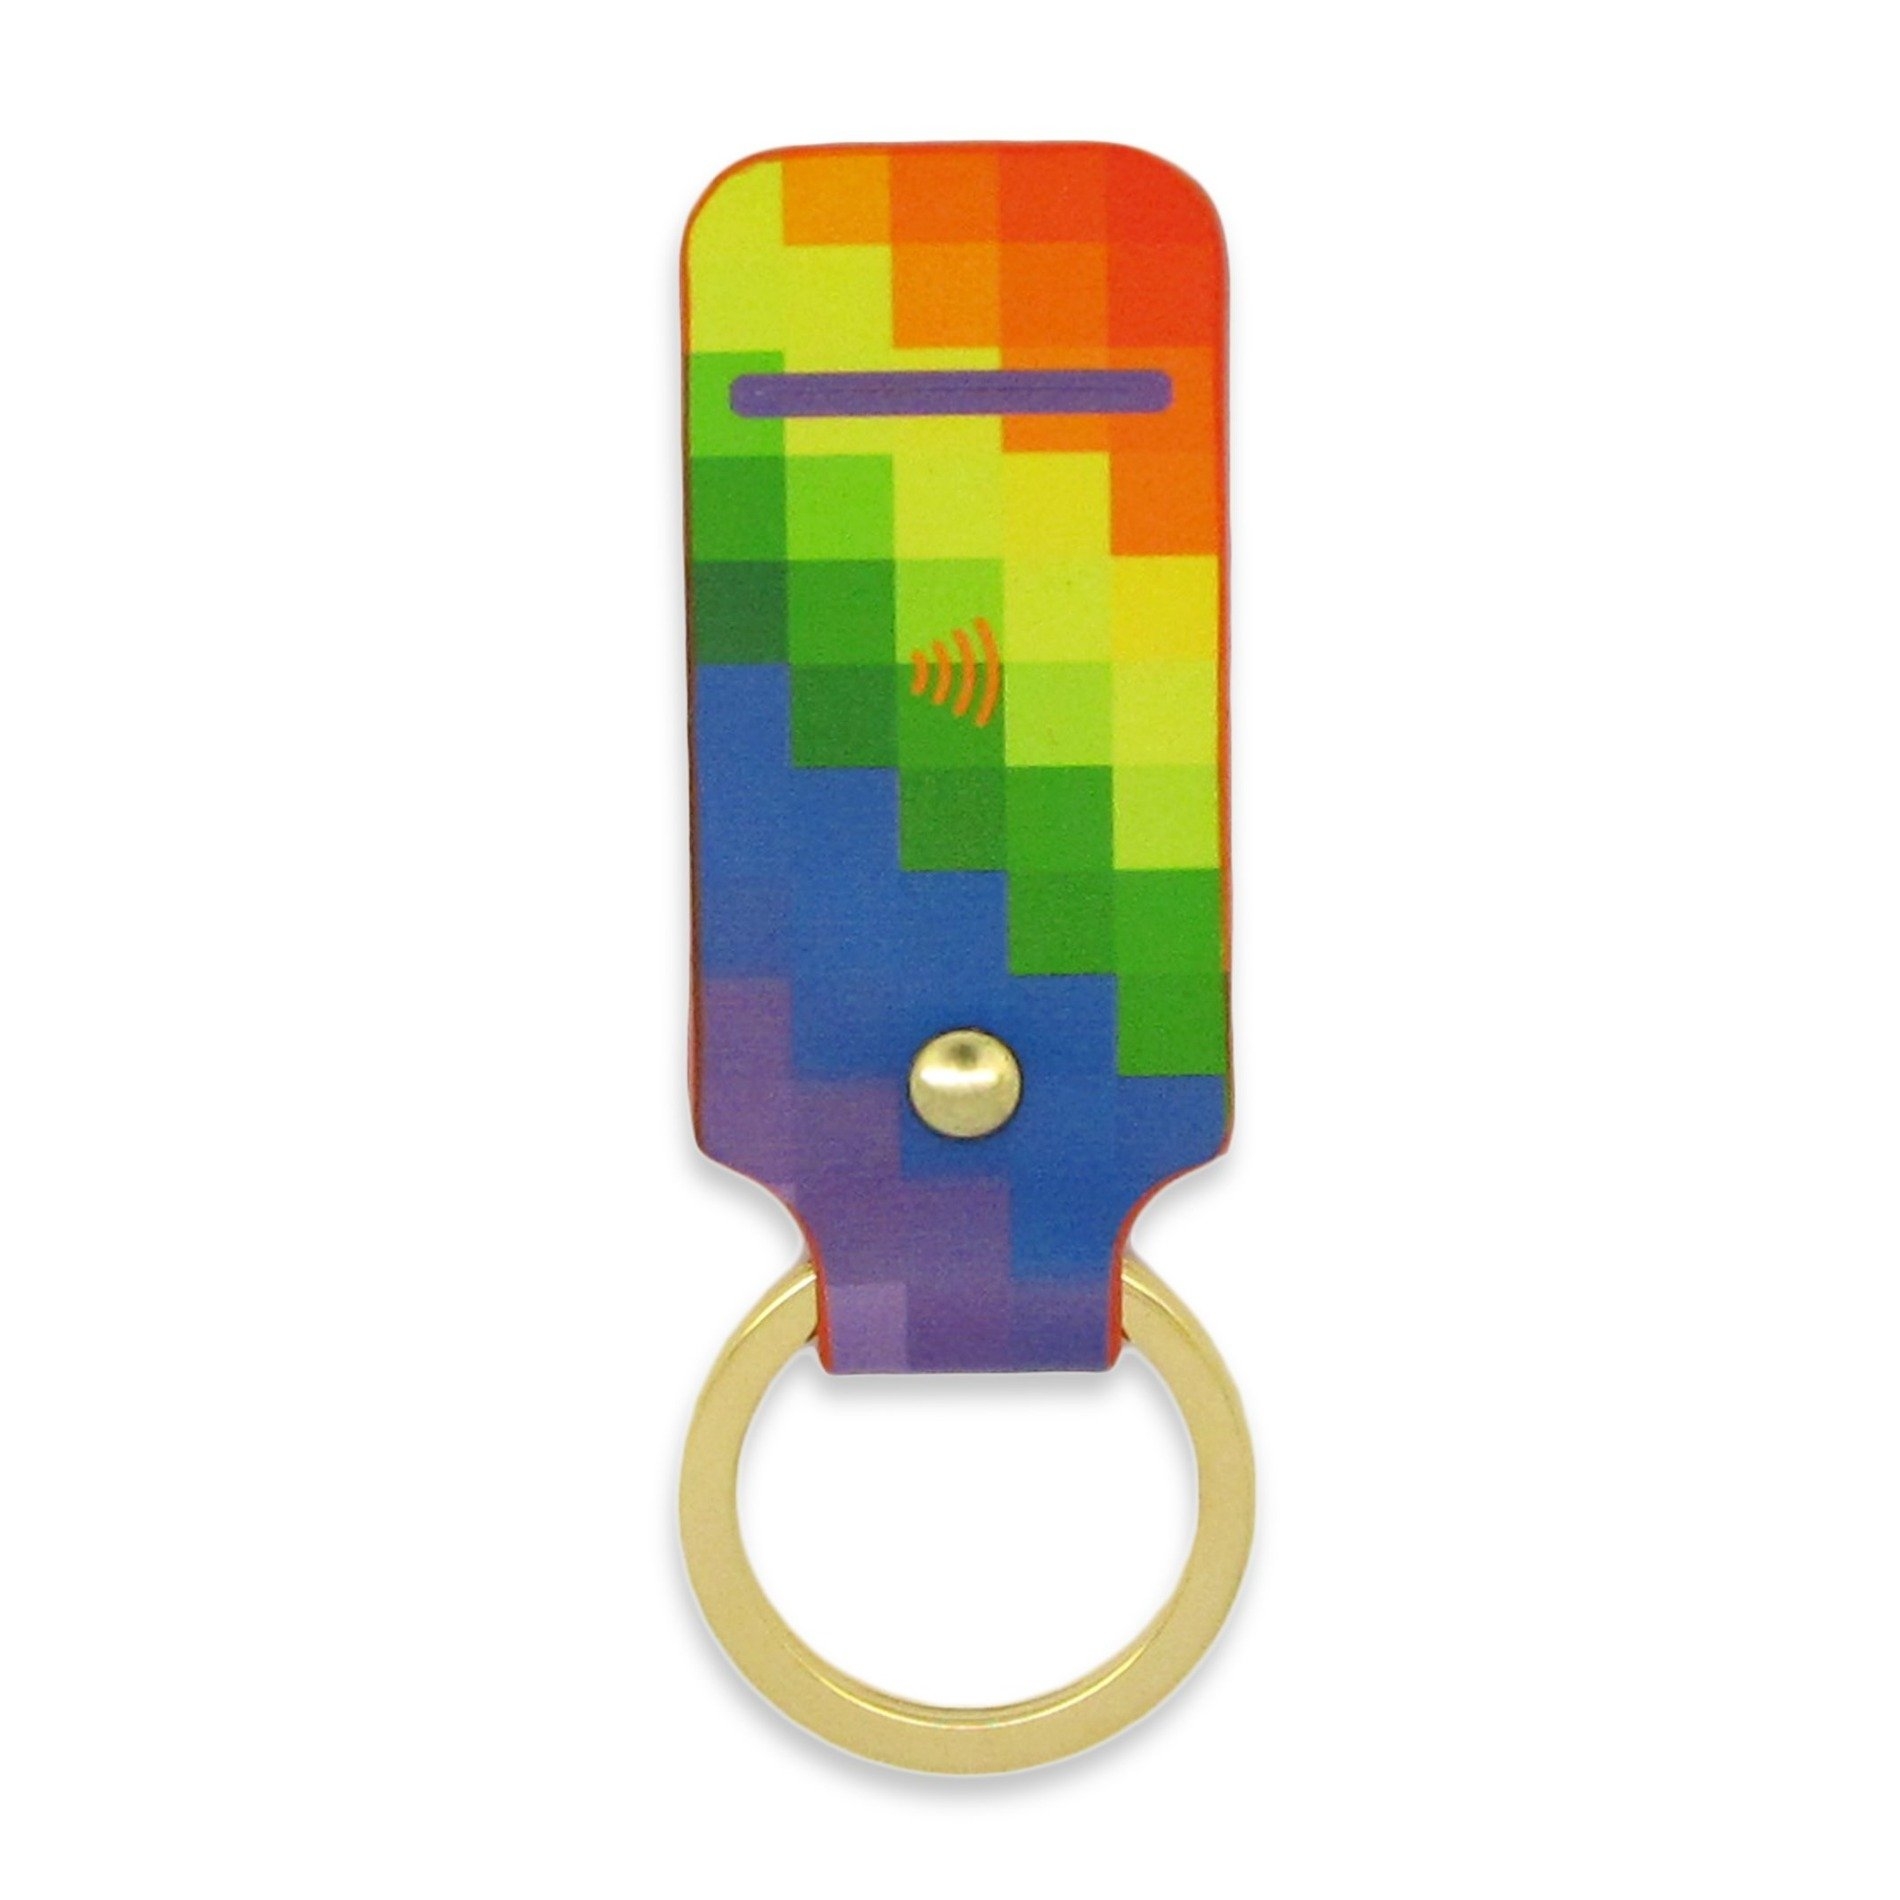 Leather Contactless Payment Key Fob – Rainbow for the National Health Service – With Contactless Payment Chip / Multicolour